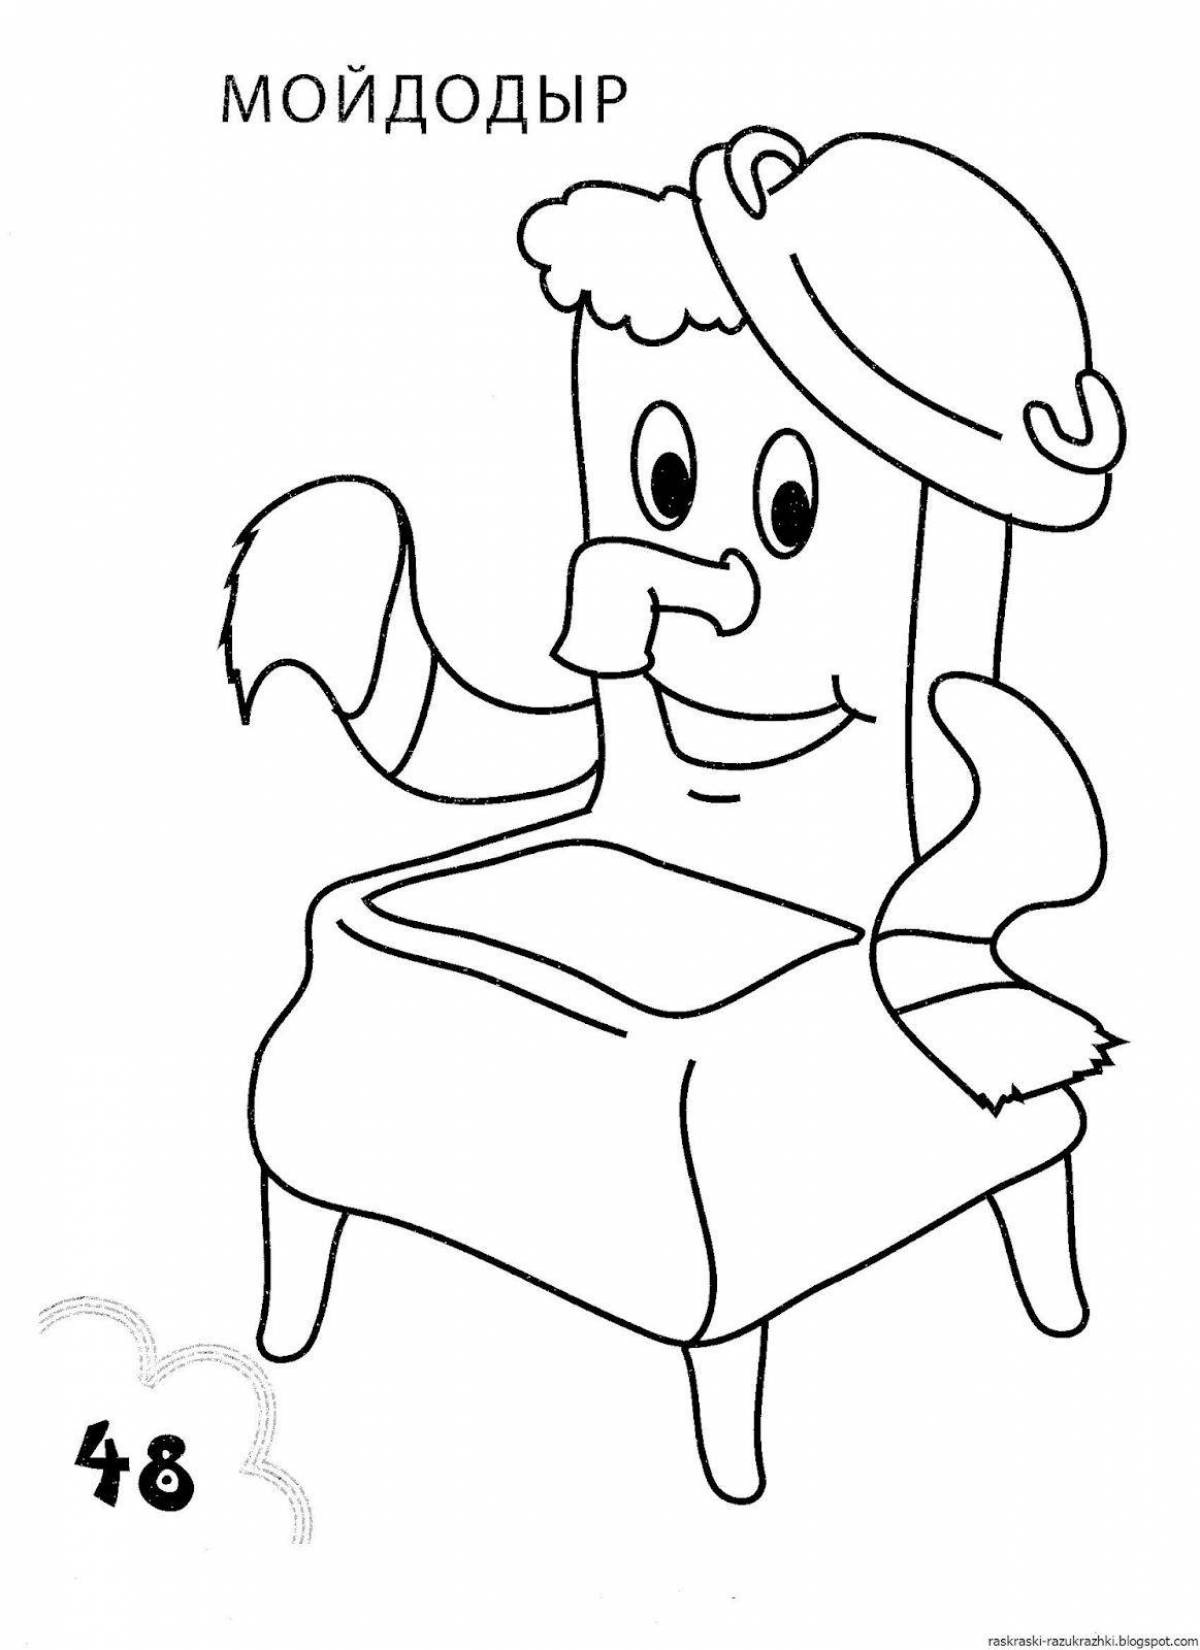 Fun coloring for toddlers